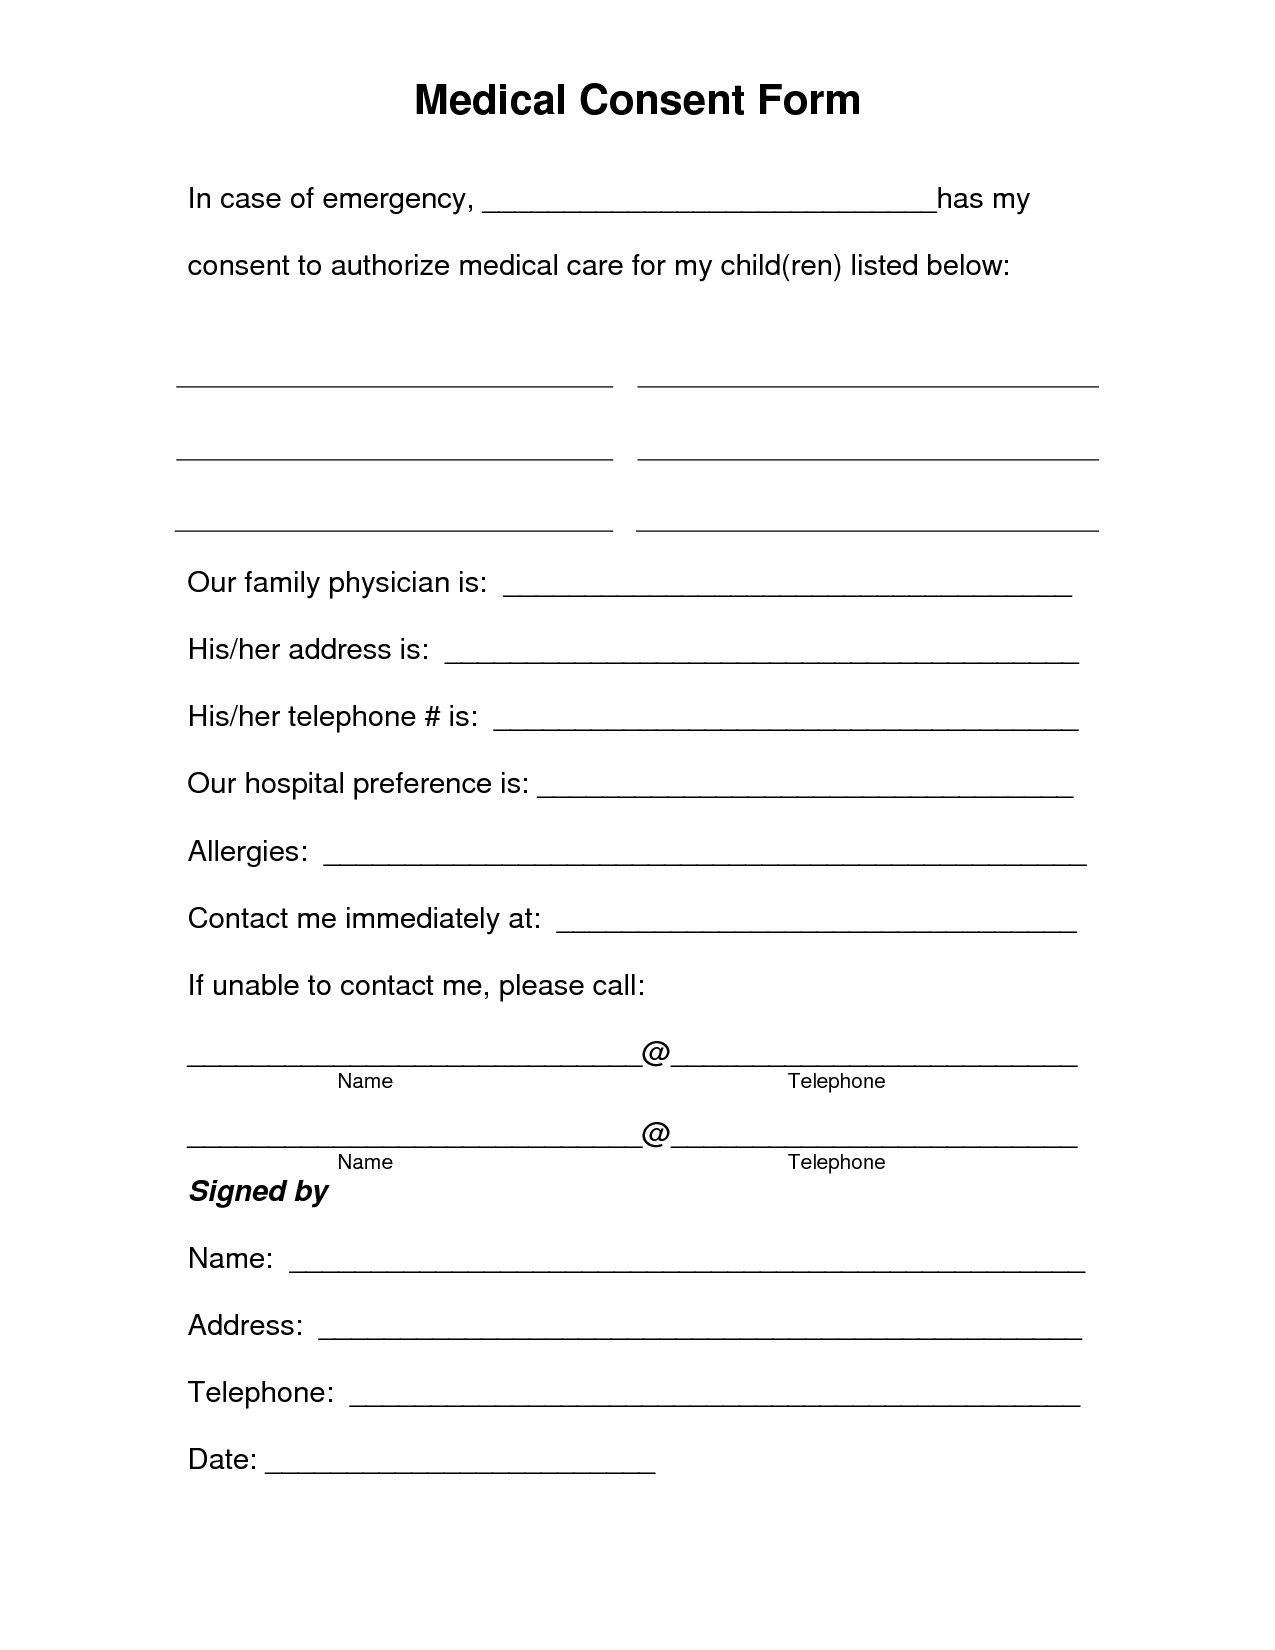 Medical Release Forms. Medical Consent Form Free Medical Release 